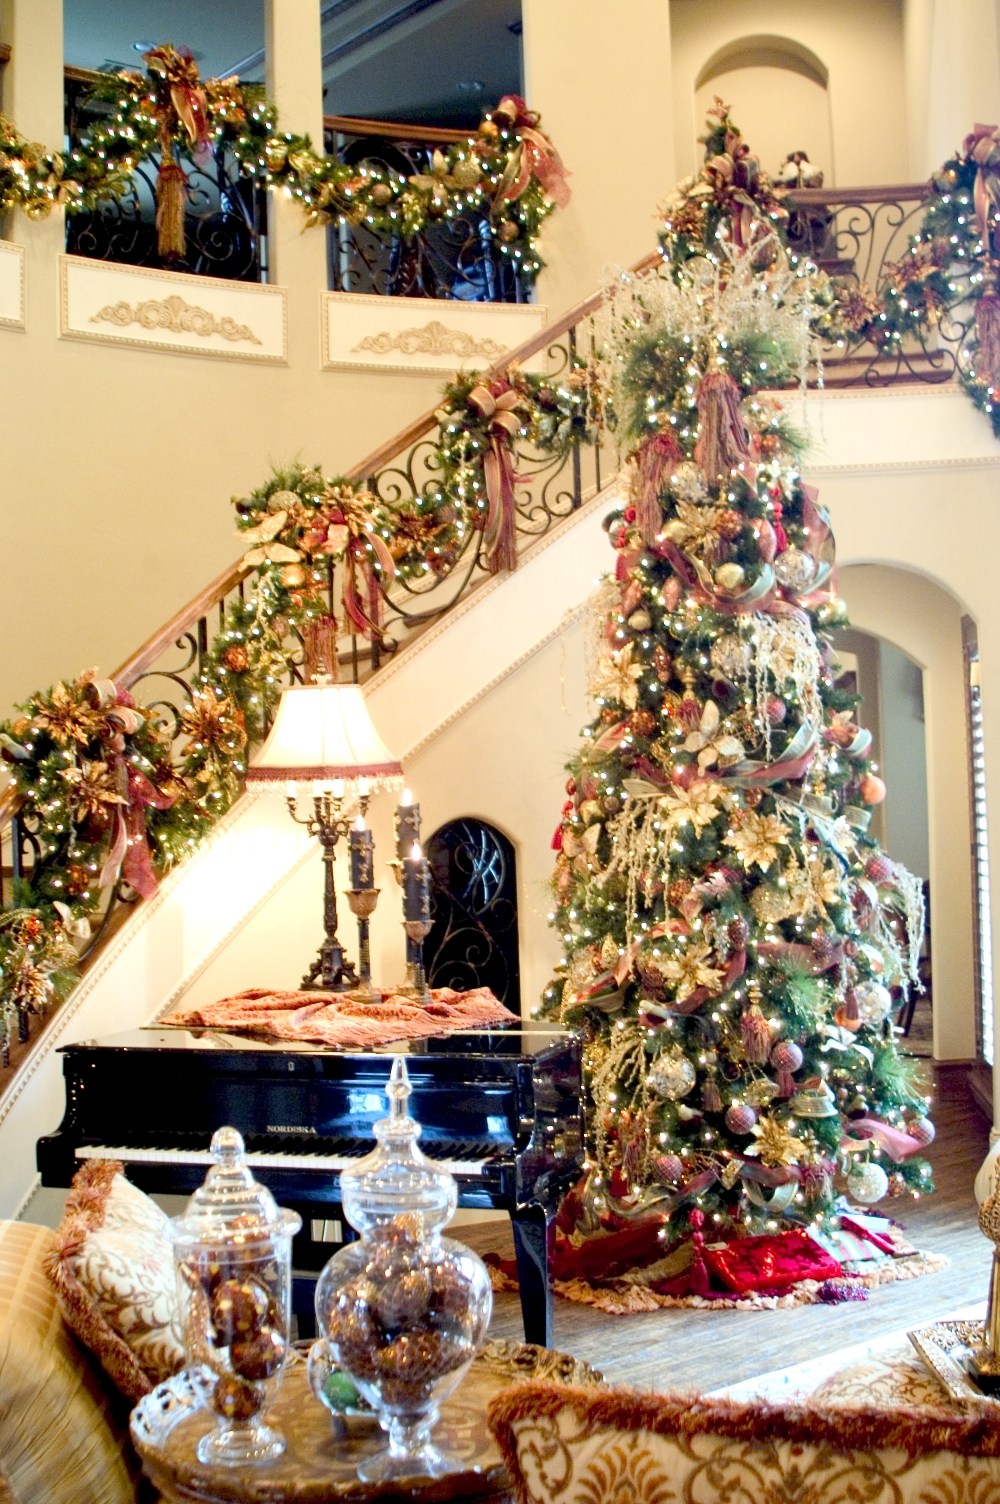 50 Christmas Decorations For Home You Can Do This Year - Decoration Love